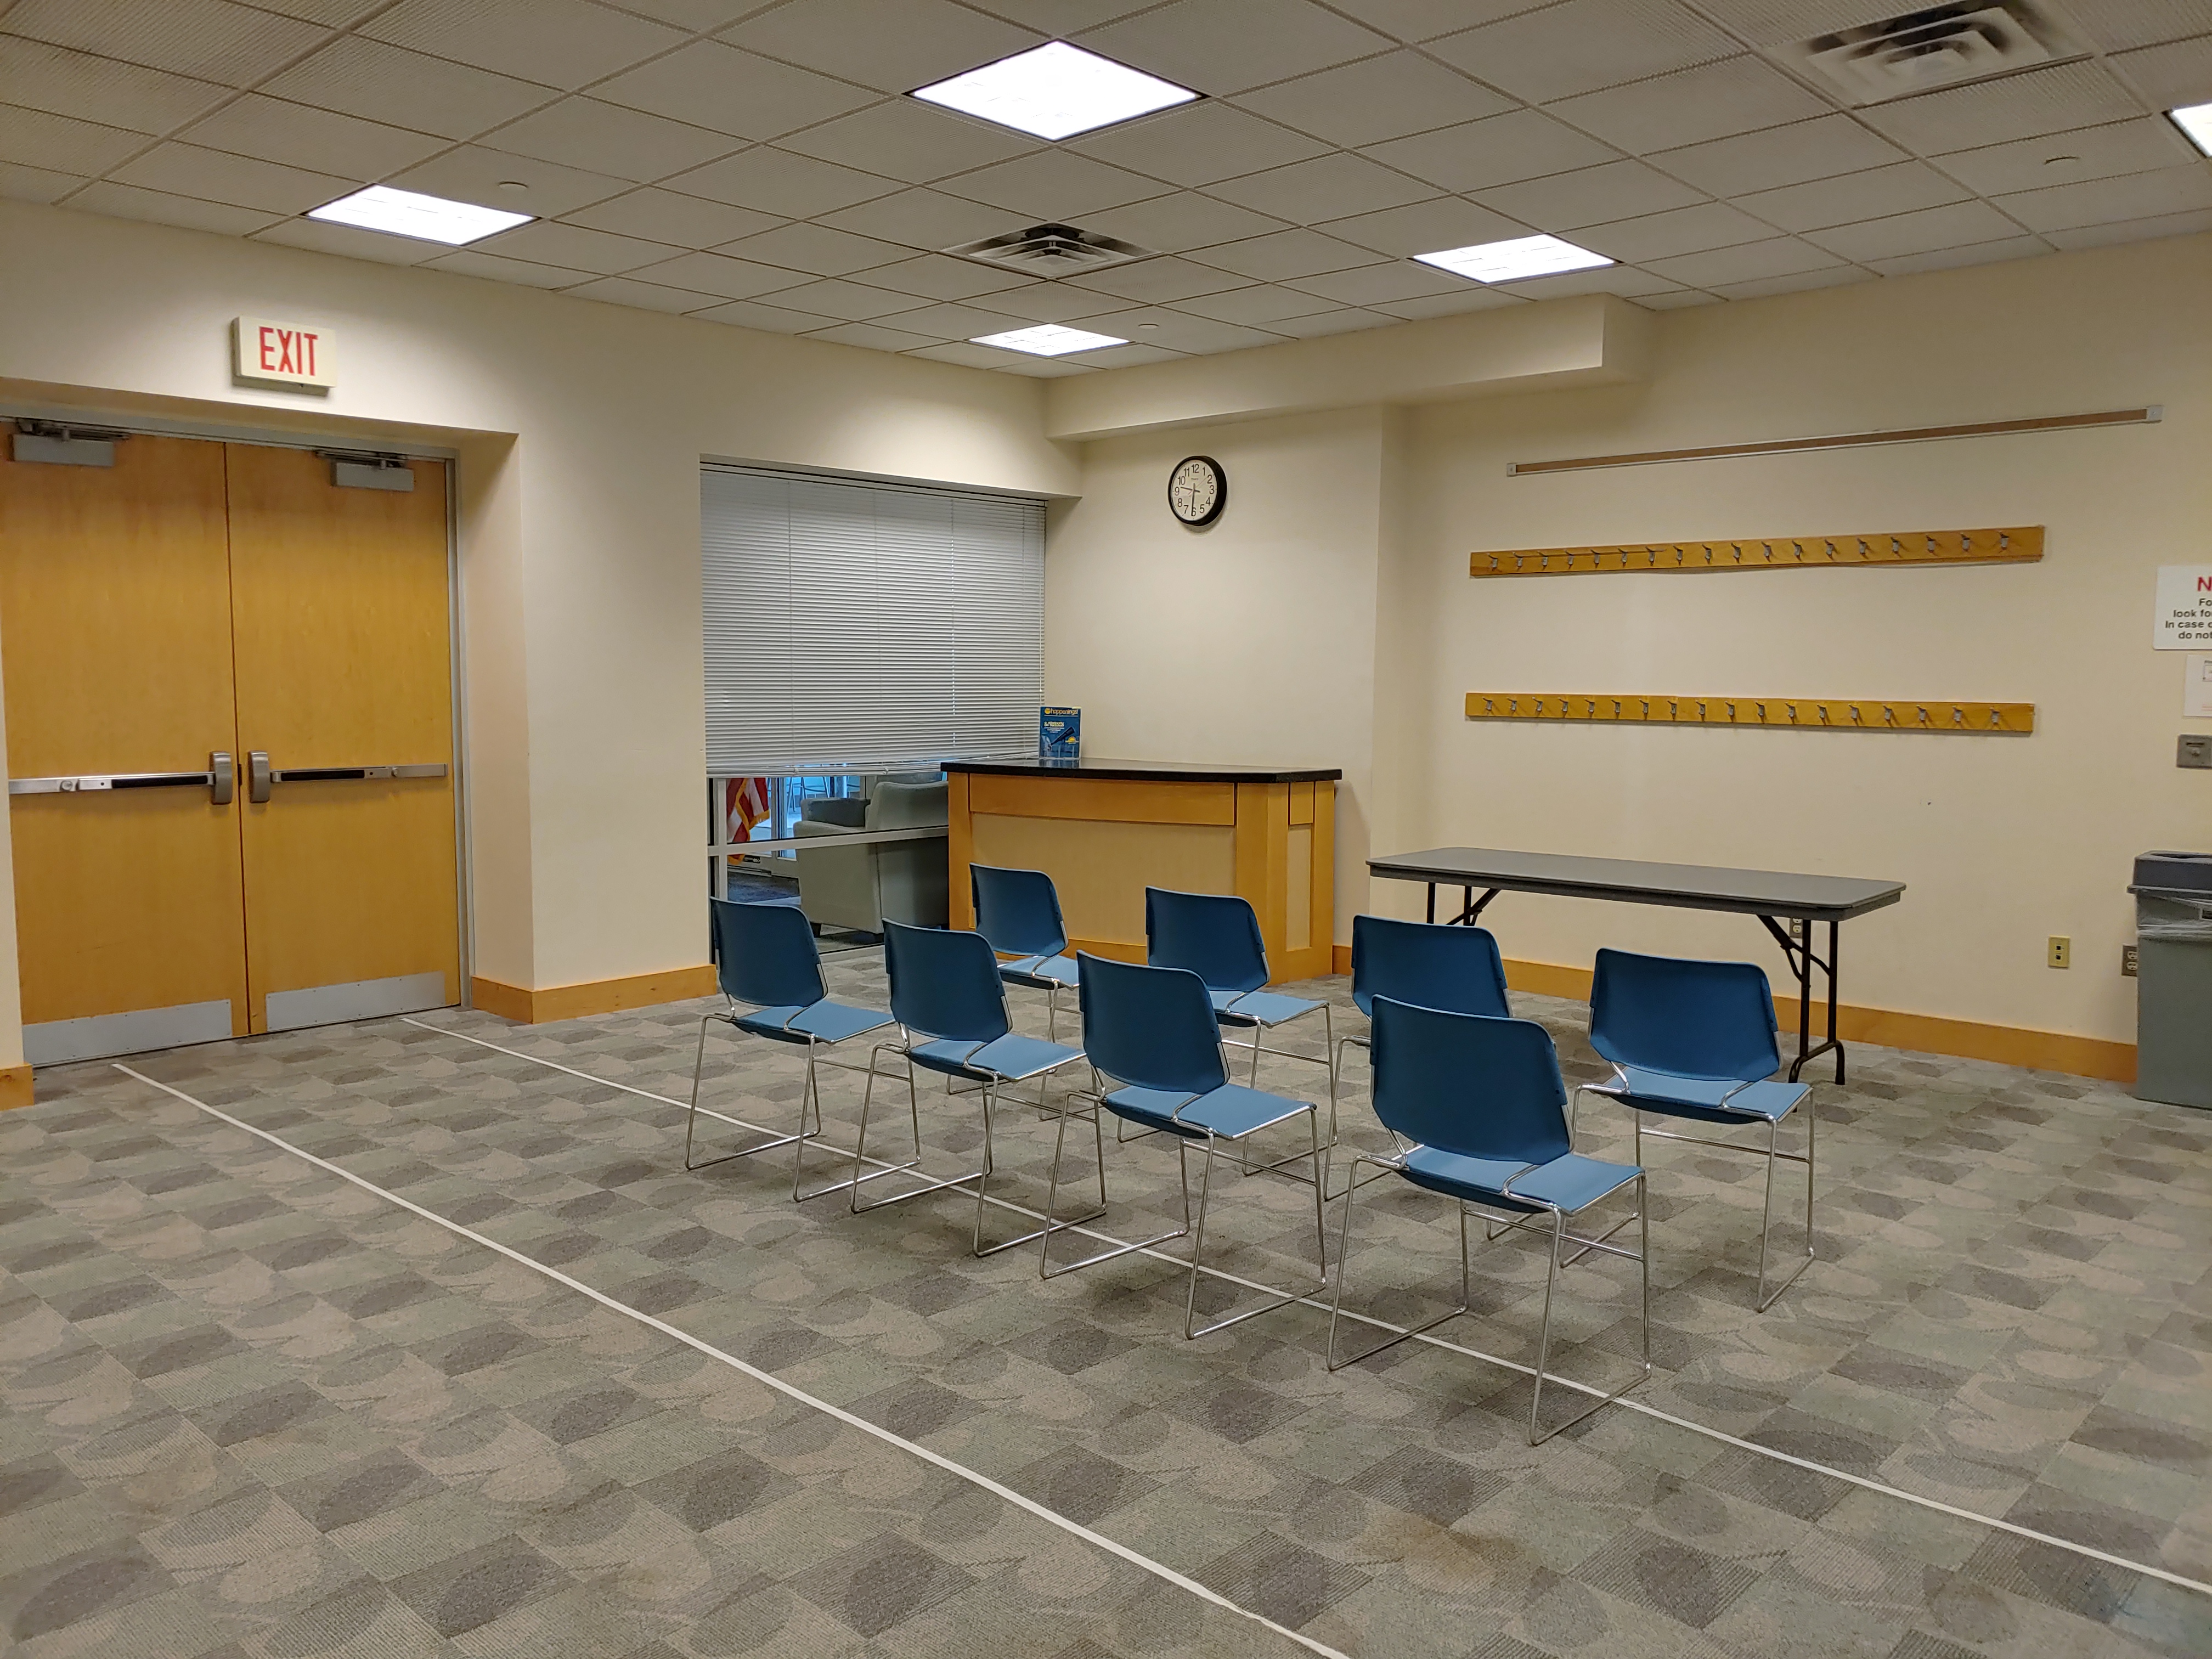 Odenton Community Meeting Room B with chairs and table